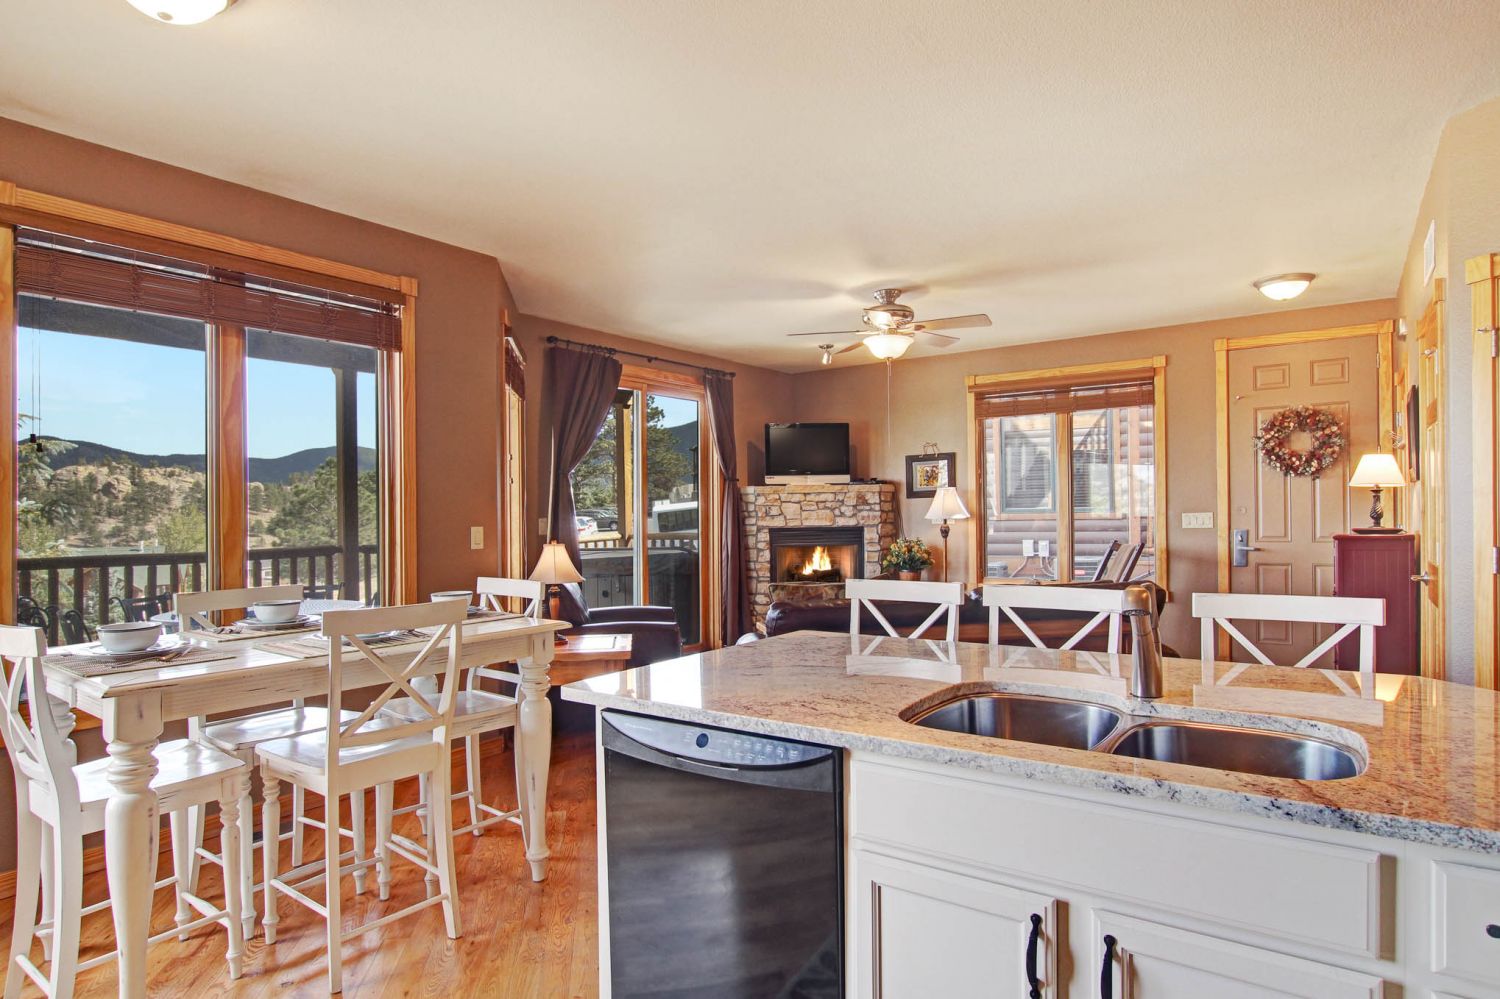 Sheep Mountain 20B - Open kitchen with seating for 4 at the dining table or the breakfast bar seats 3, all while enjoyed those amazing views